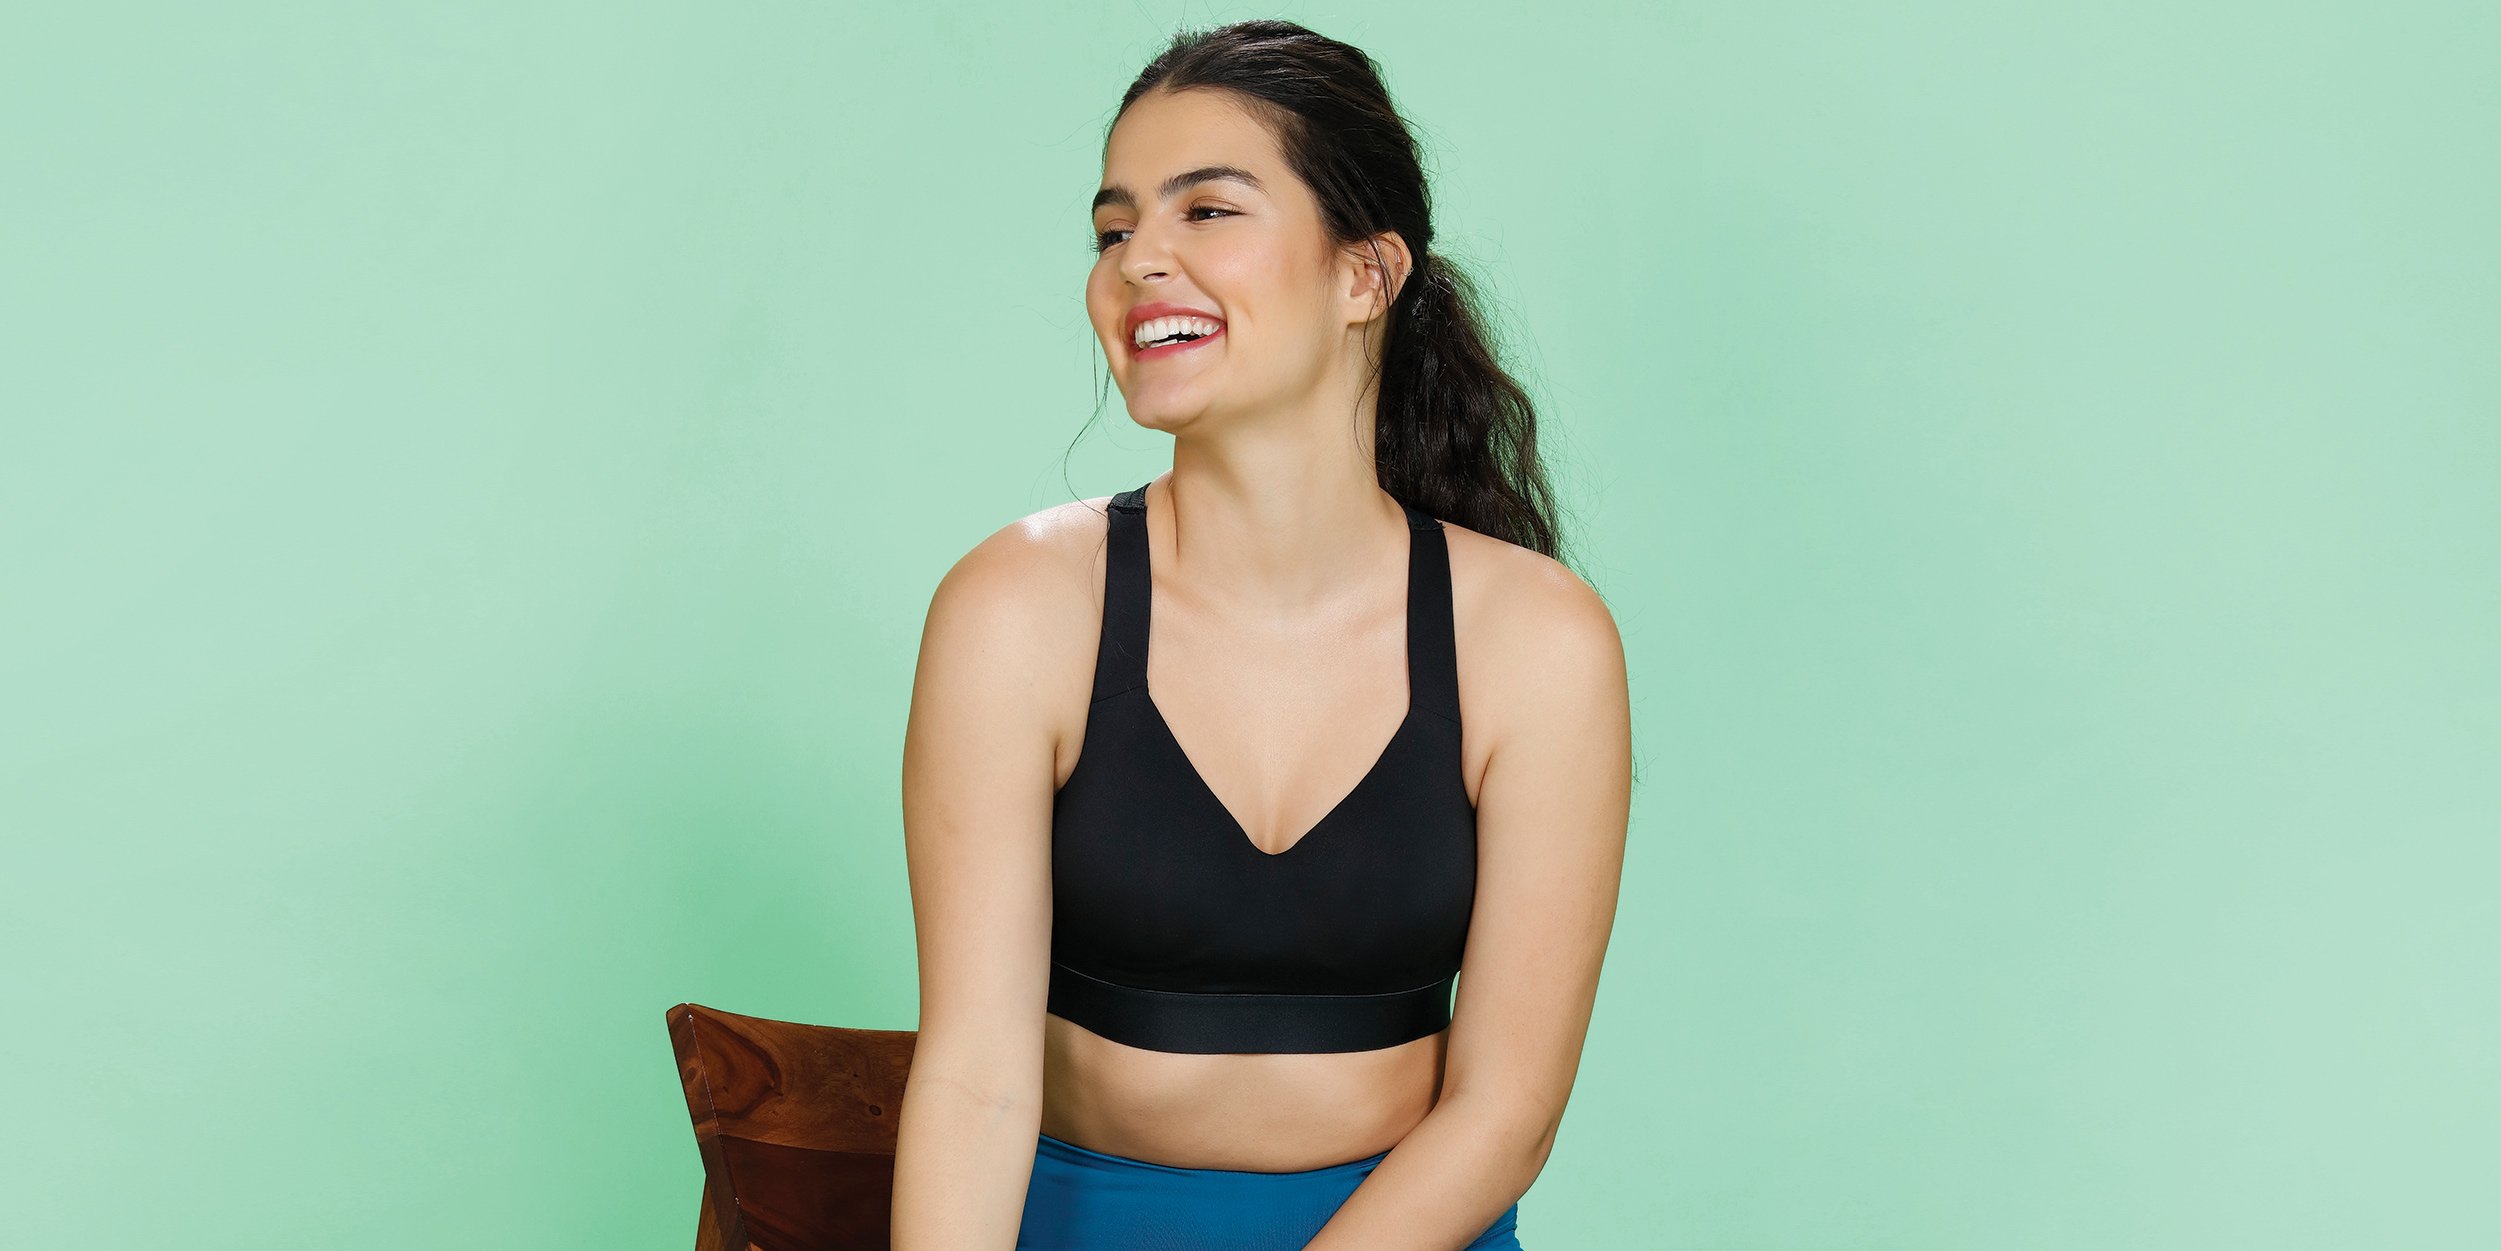 Zivame - Ever wondered what makes the Super Support Bra so